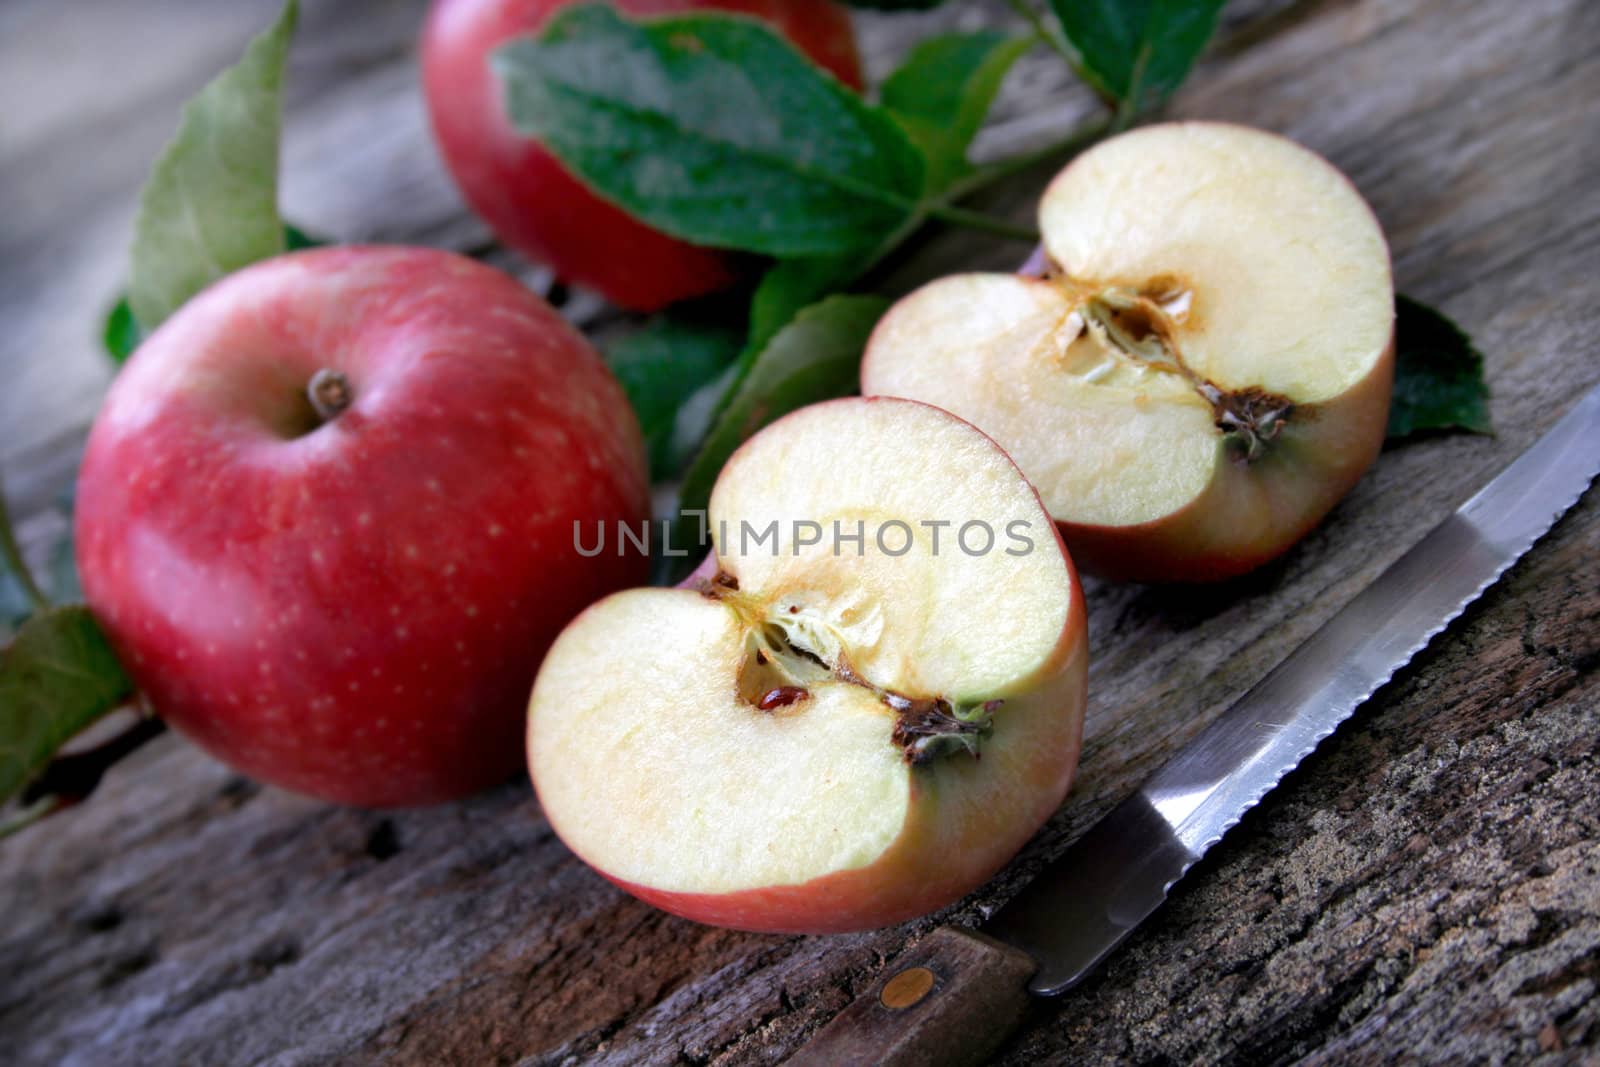 Fresh apples just sliced on a rustic background.